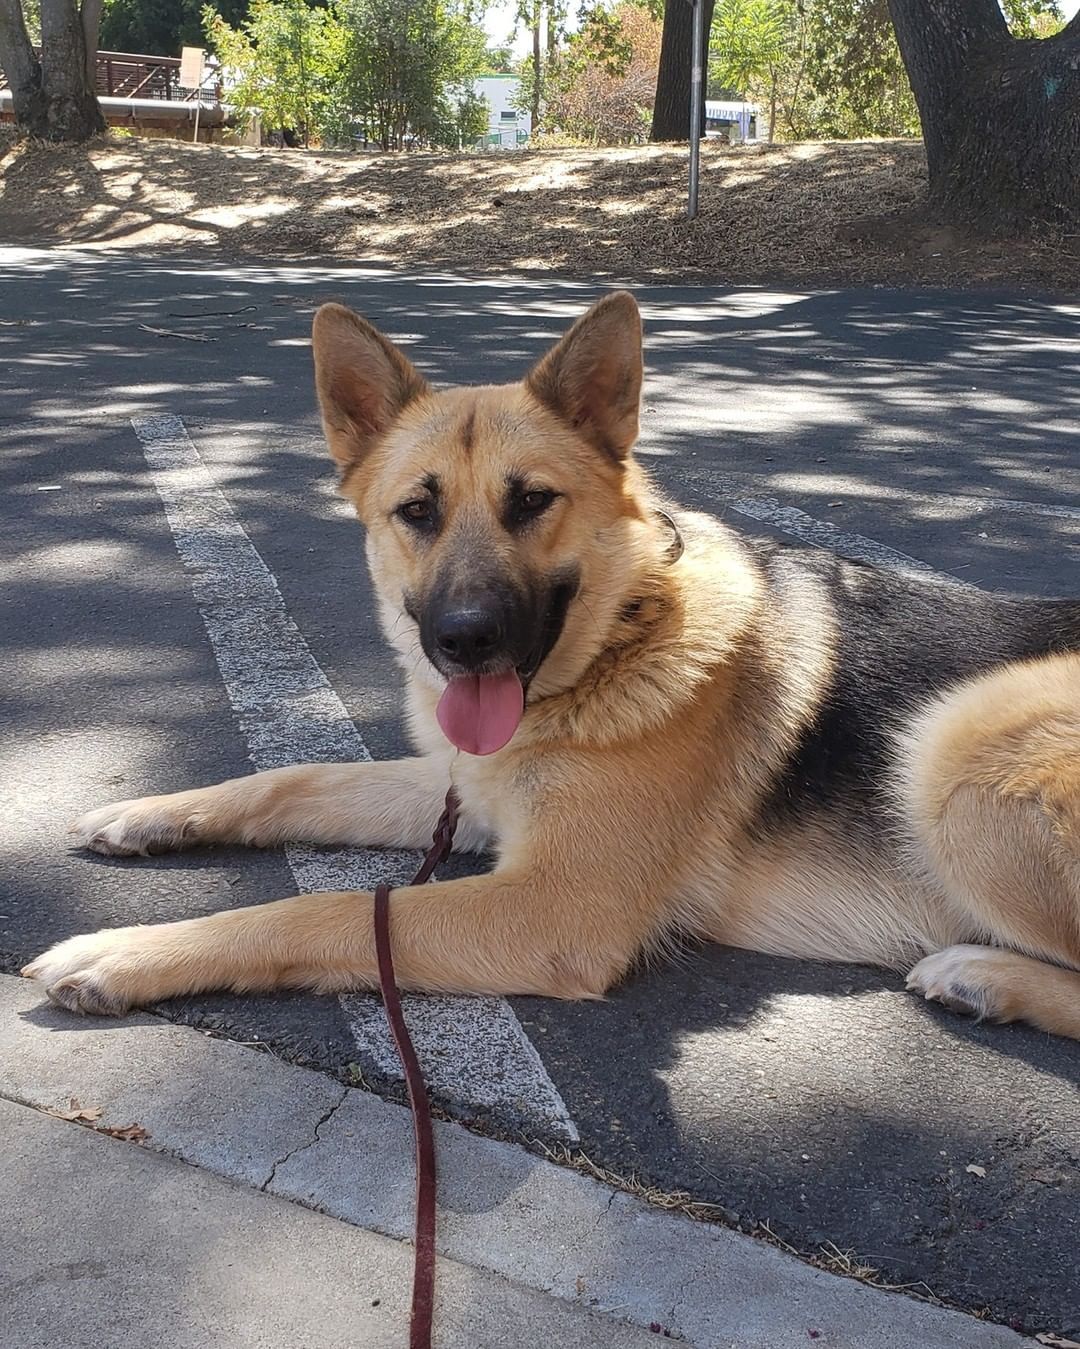 German shepherd laying under trees in the shade